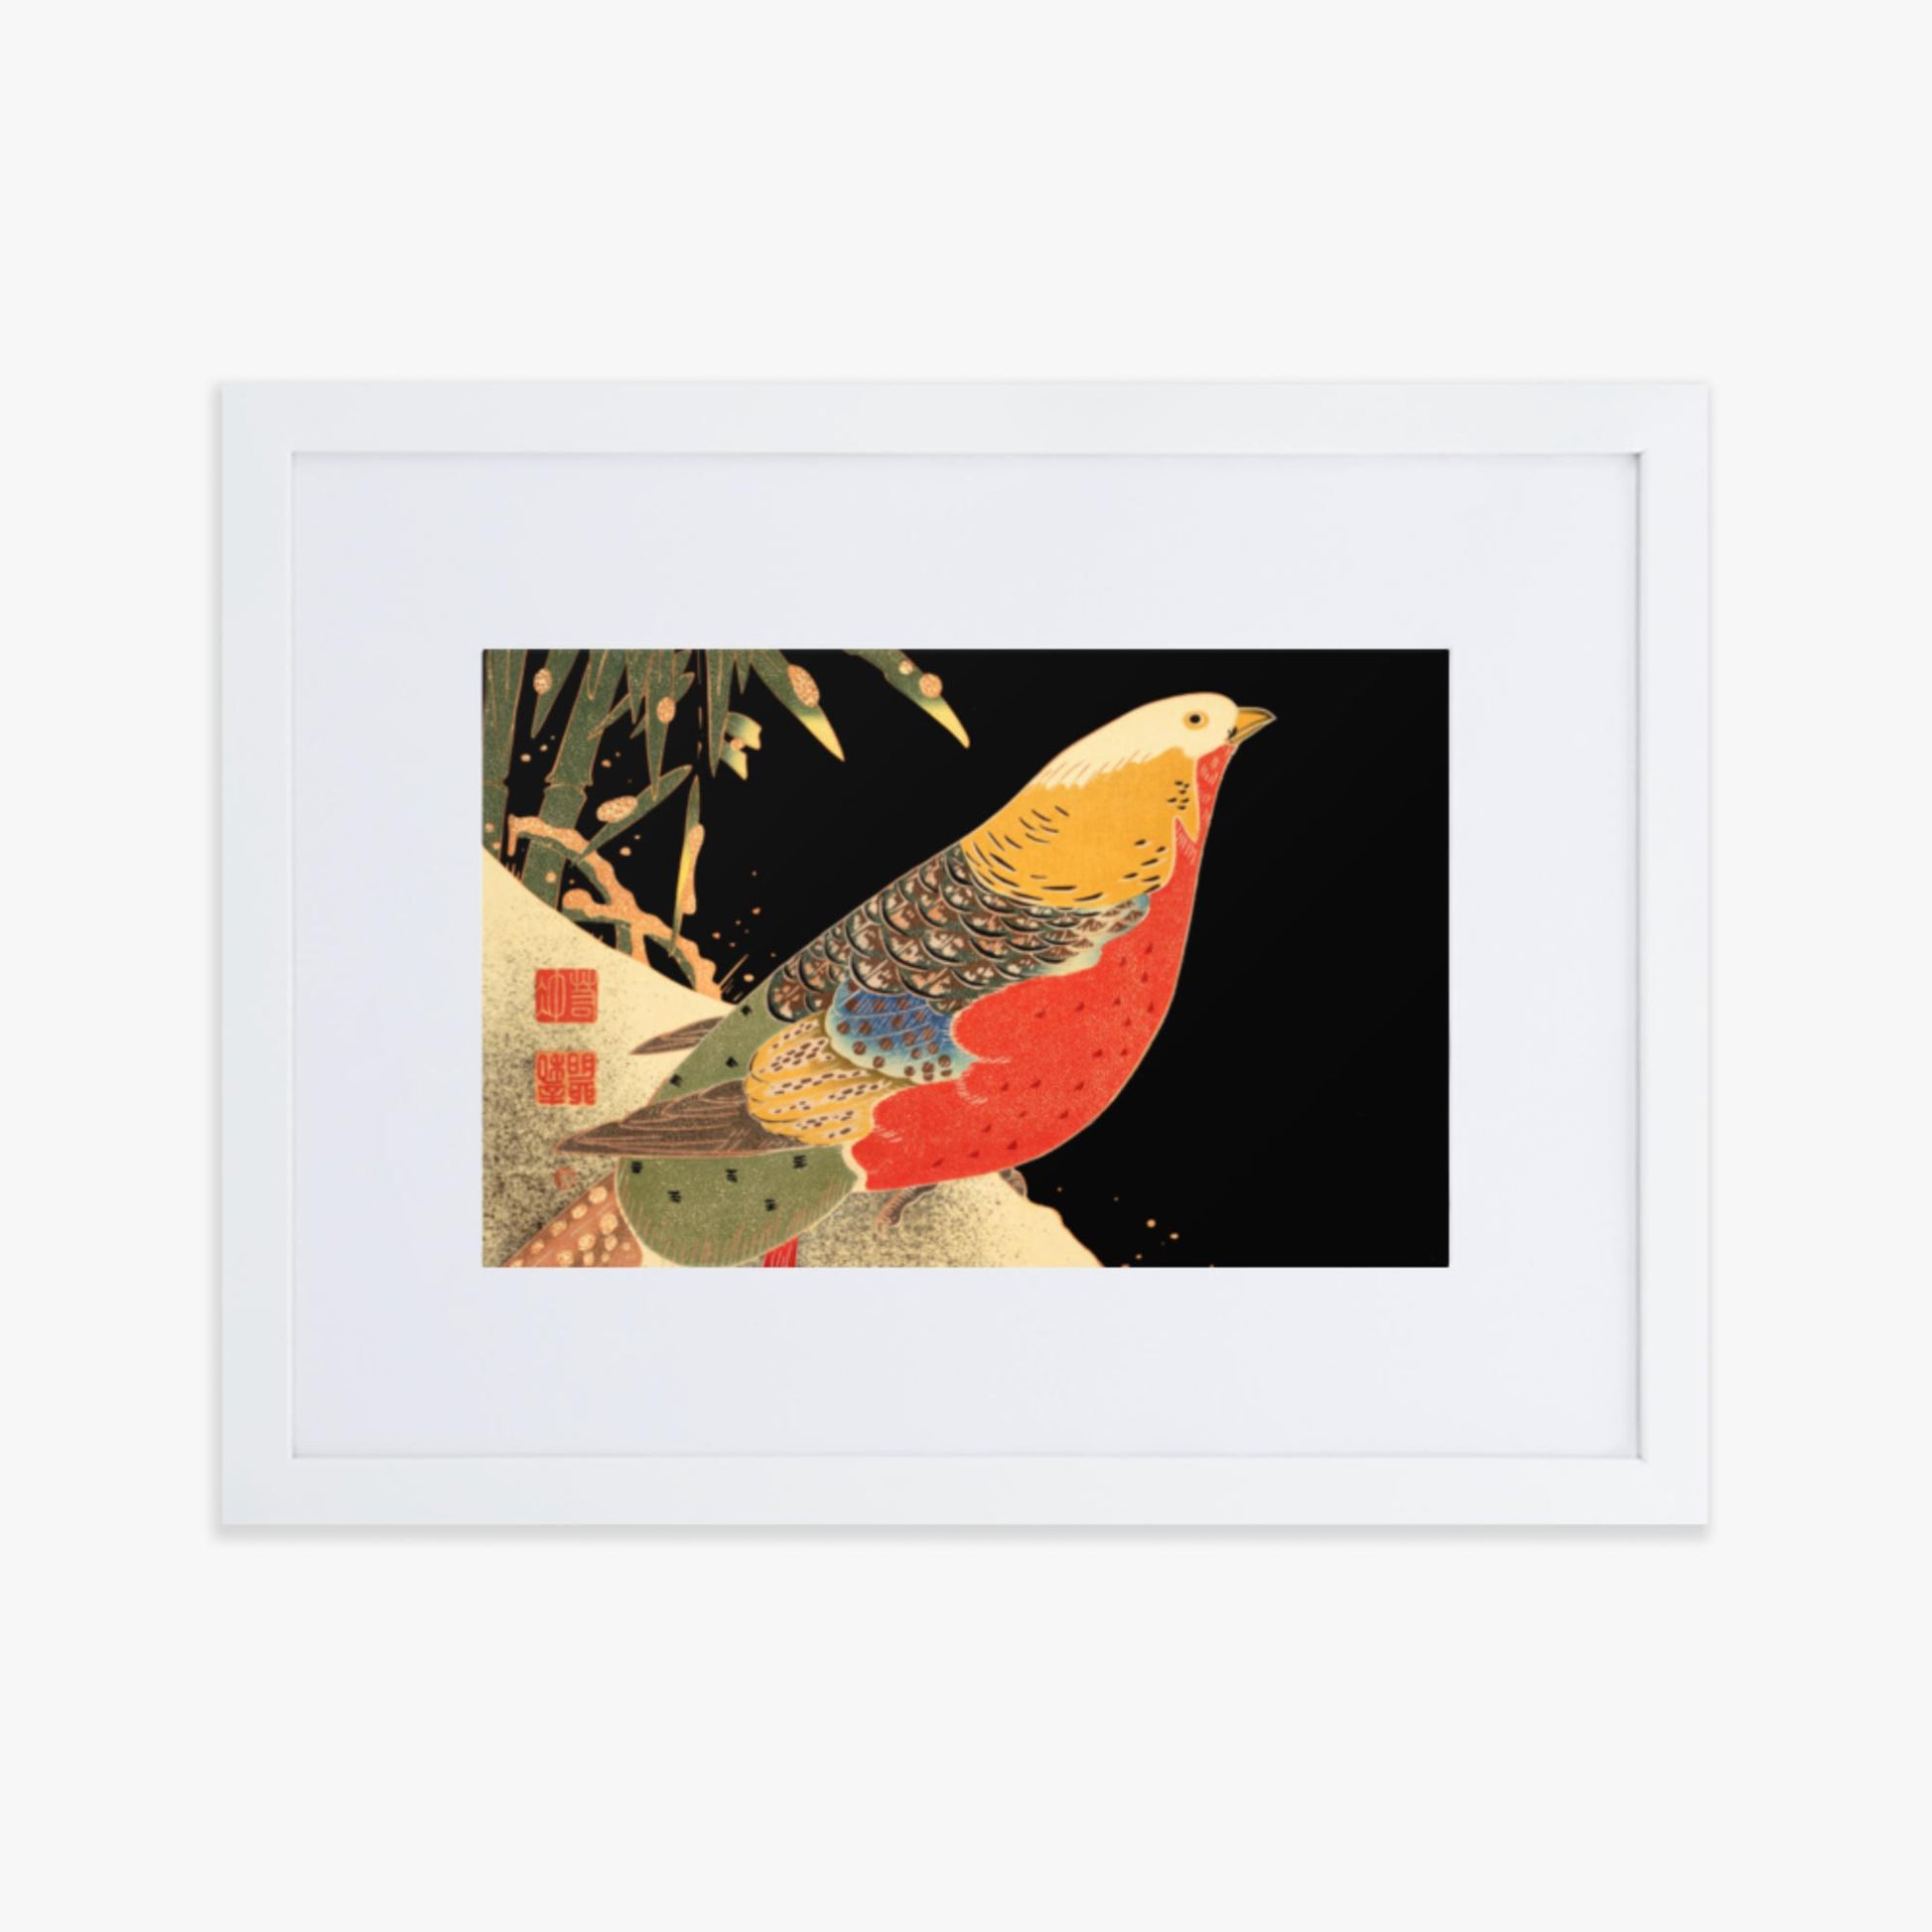 Ito Jakuchu - Golden Pheasant in the Snow 30x40 cm Poster With White Frame